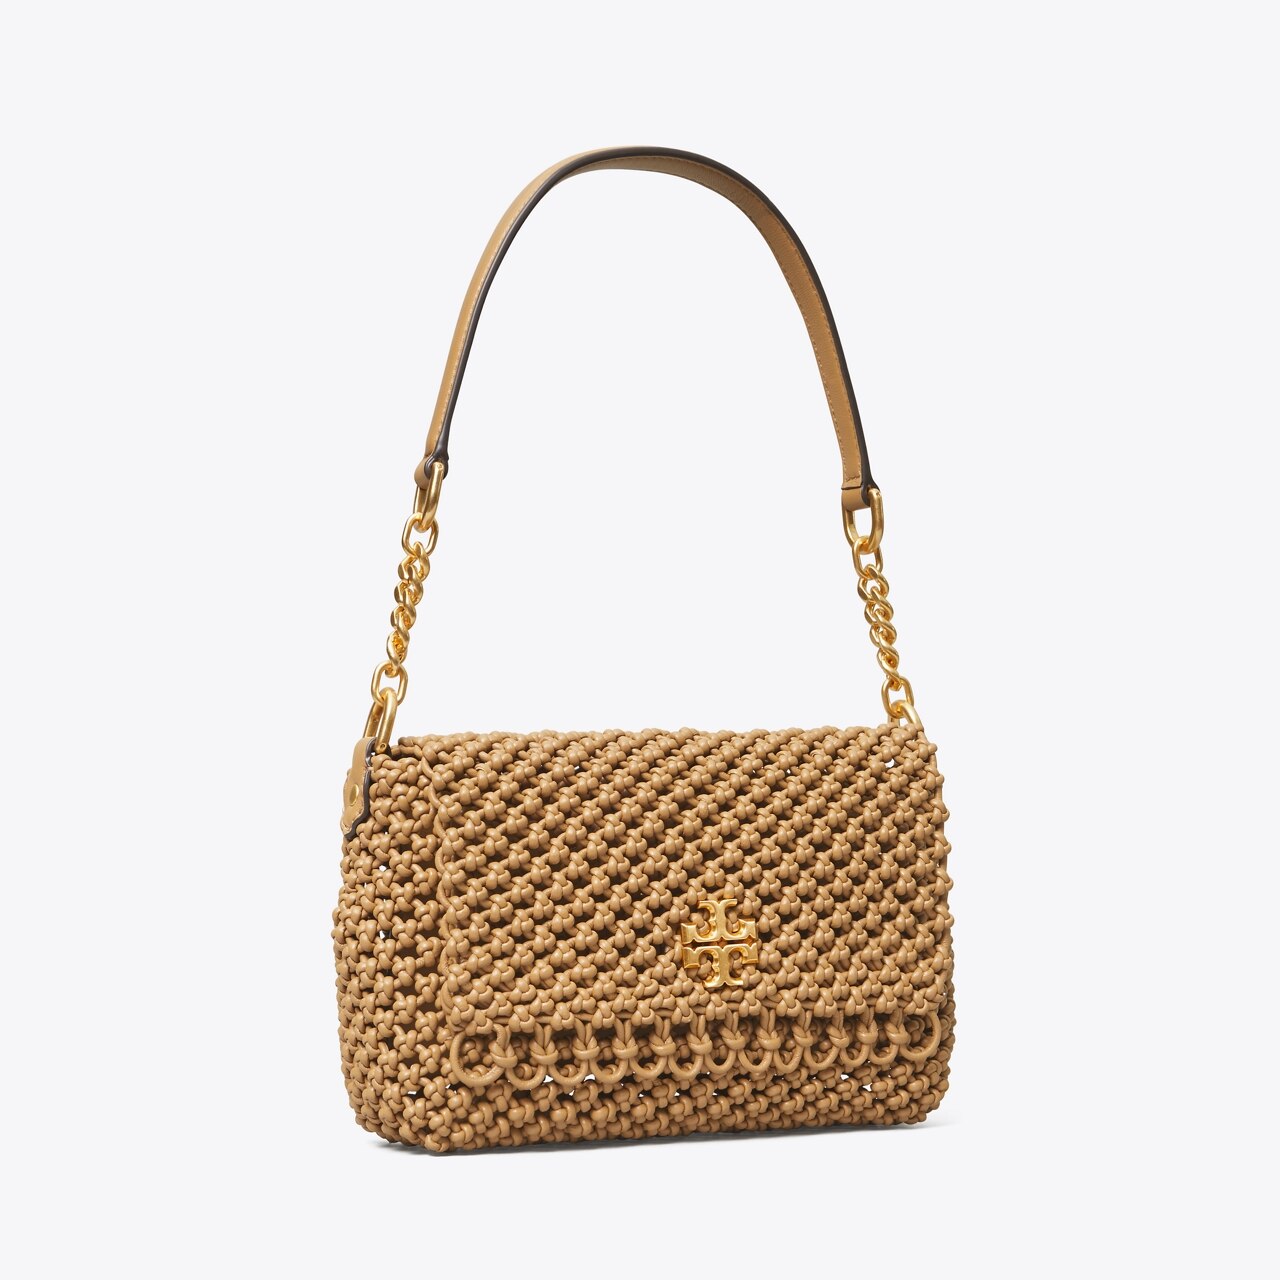 Tory Burch Small Kira Woven Leather Shoulder Bag